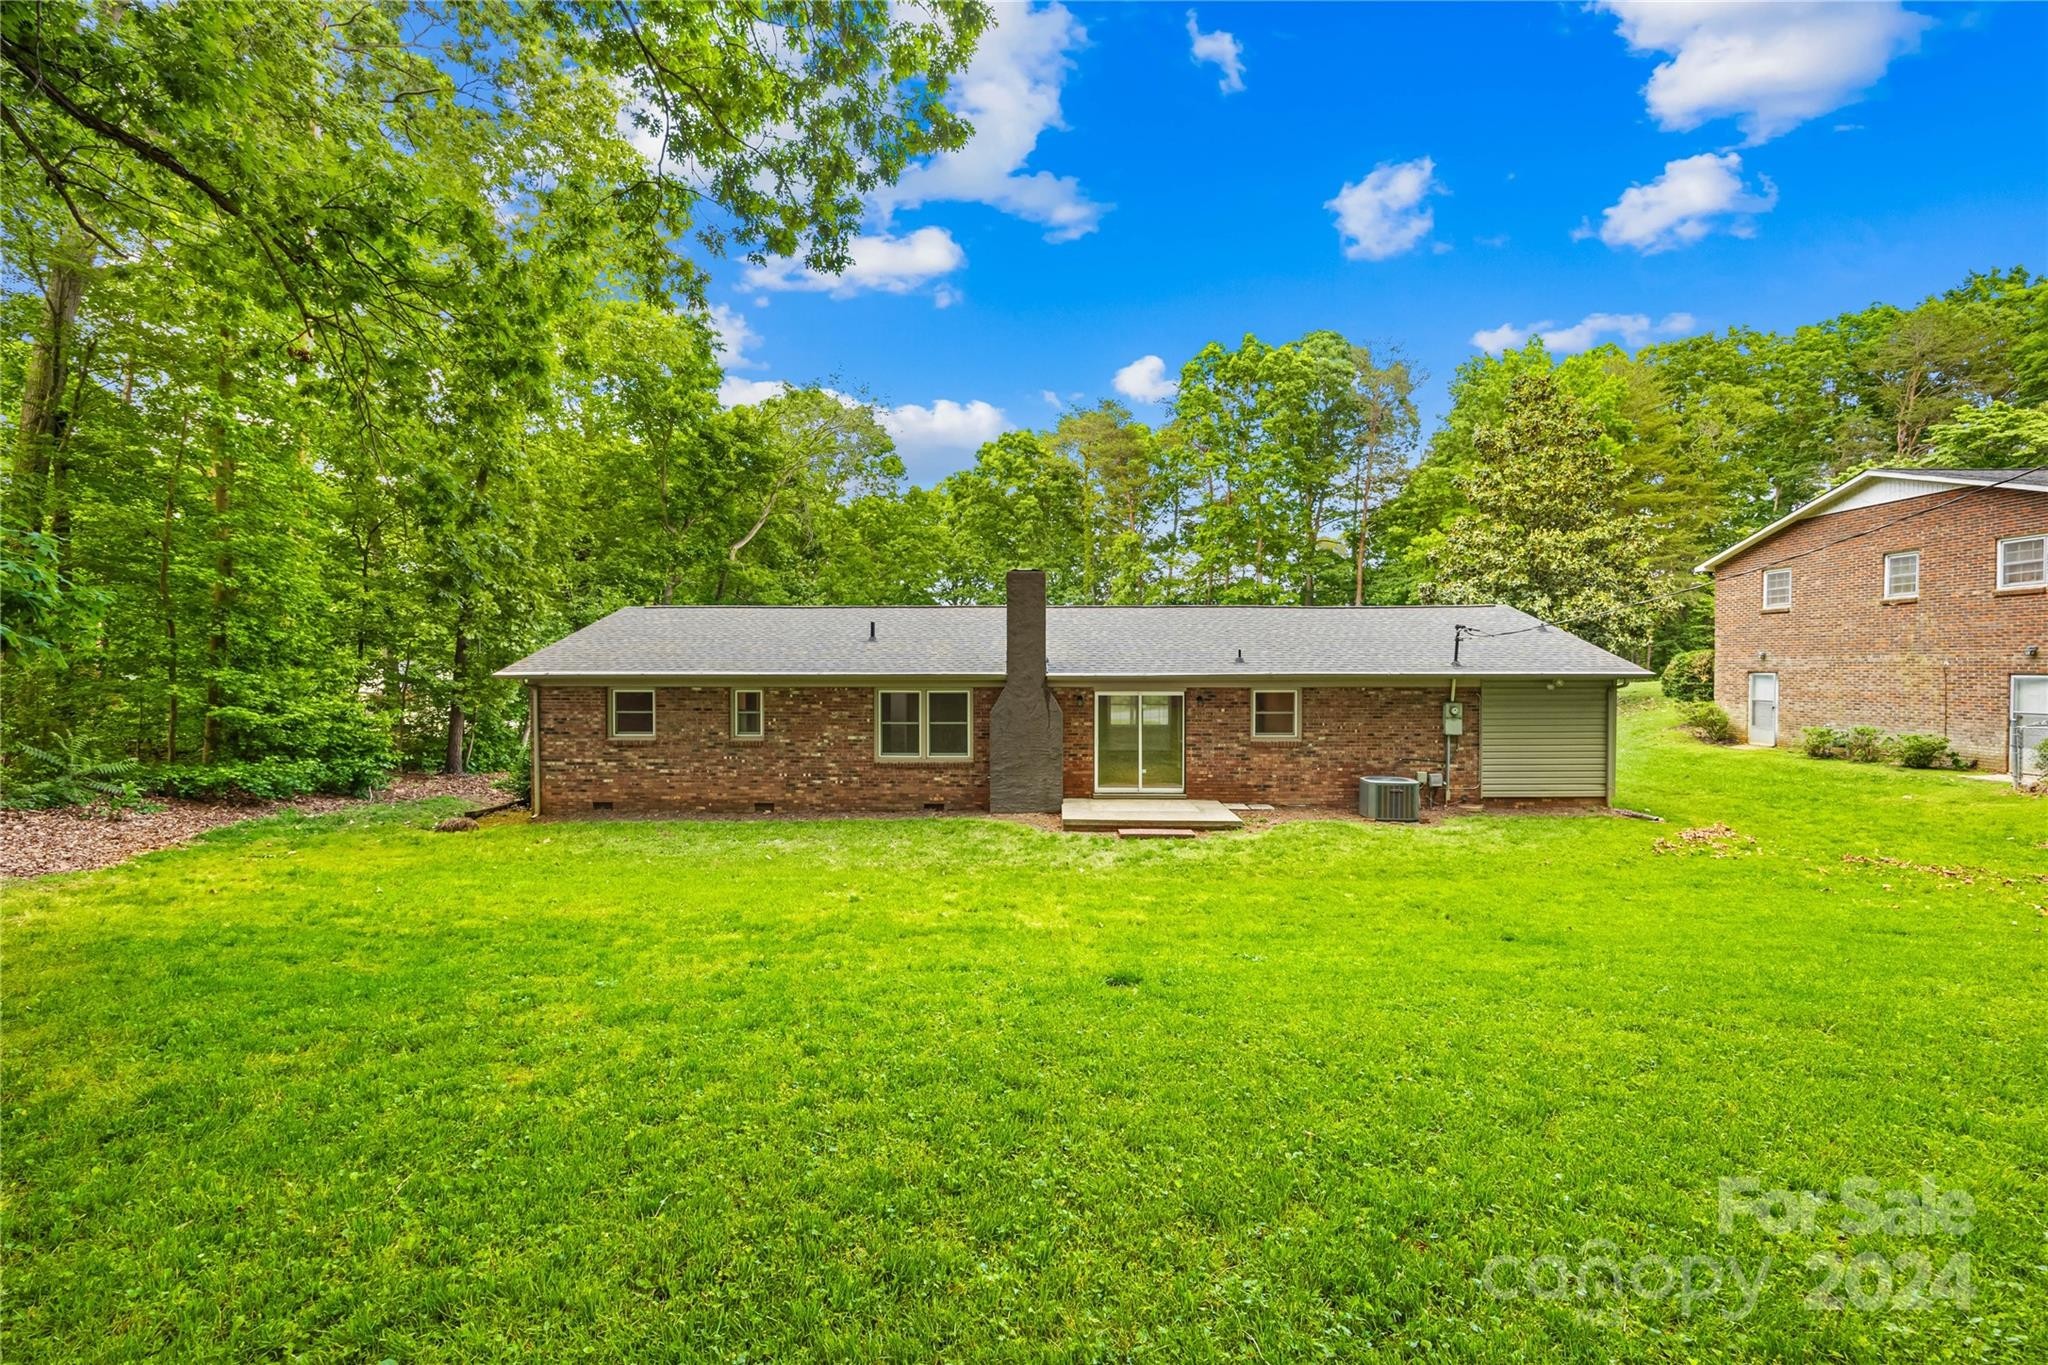 33. 1826 Whispering Pines Road